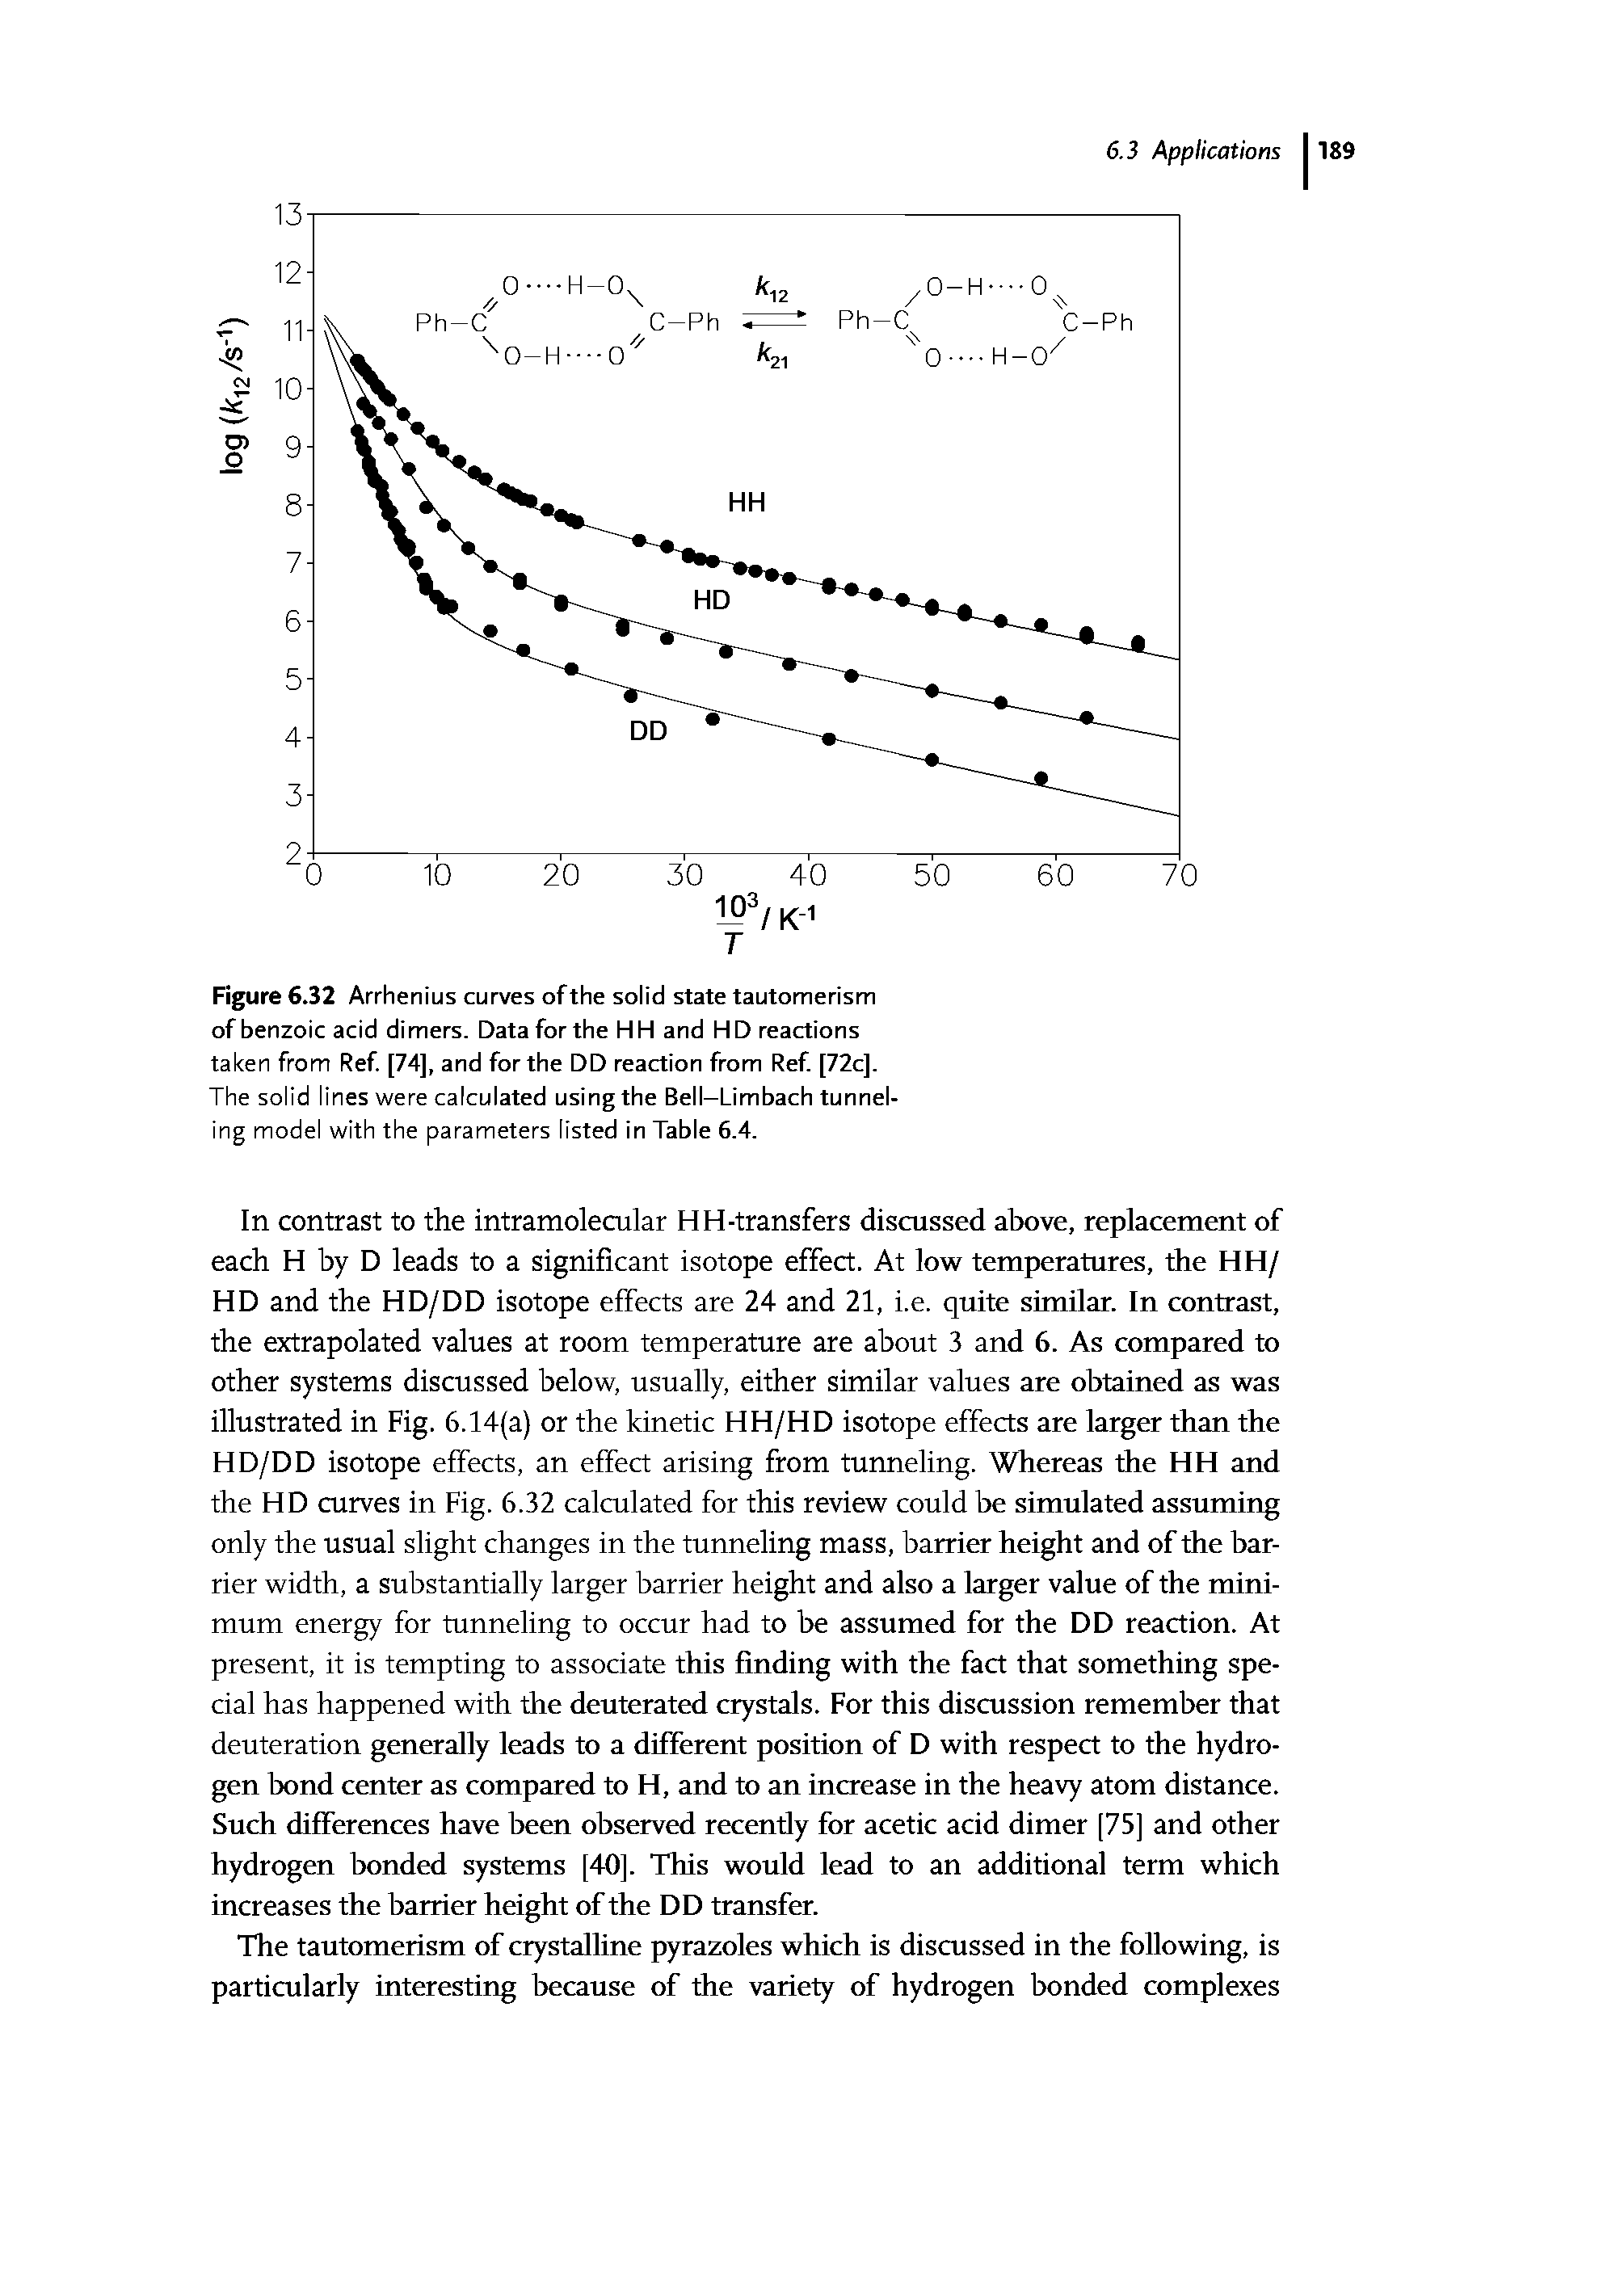 Figure 6.32 Arrhenius curves of the solid state tautomerism of benzoic acid dimers. Data for the HH and HD reactions taken from Ref [74], and for the DD reaction from Ref [72cj. The solid lines were calculated using the Bell—Limbach tunneling model with the parameters listed in Table 6.4.